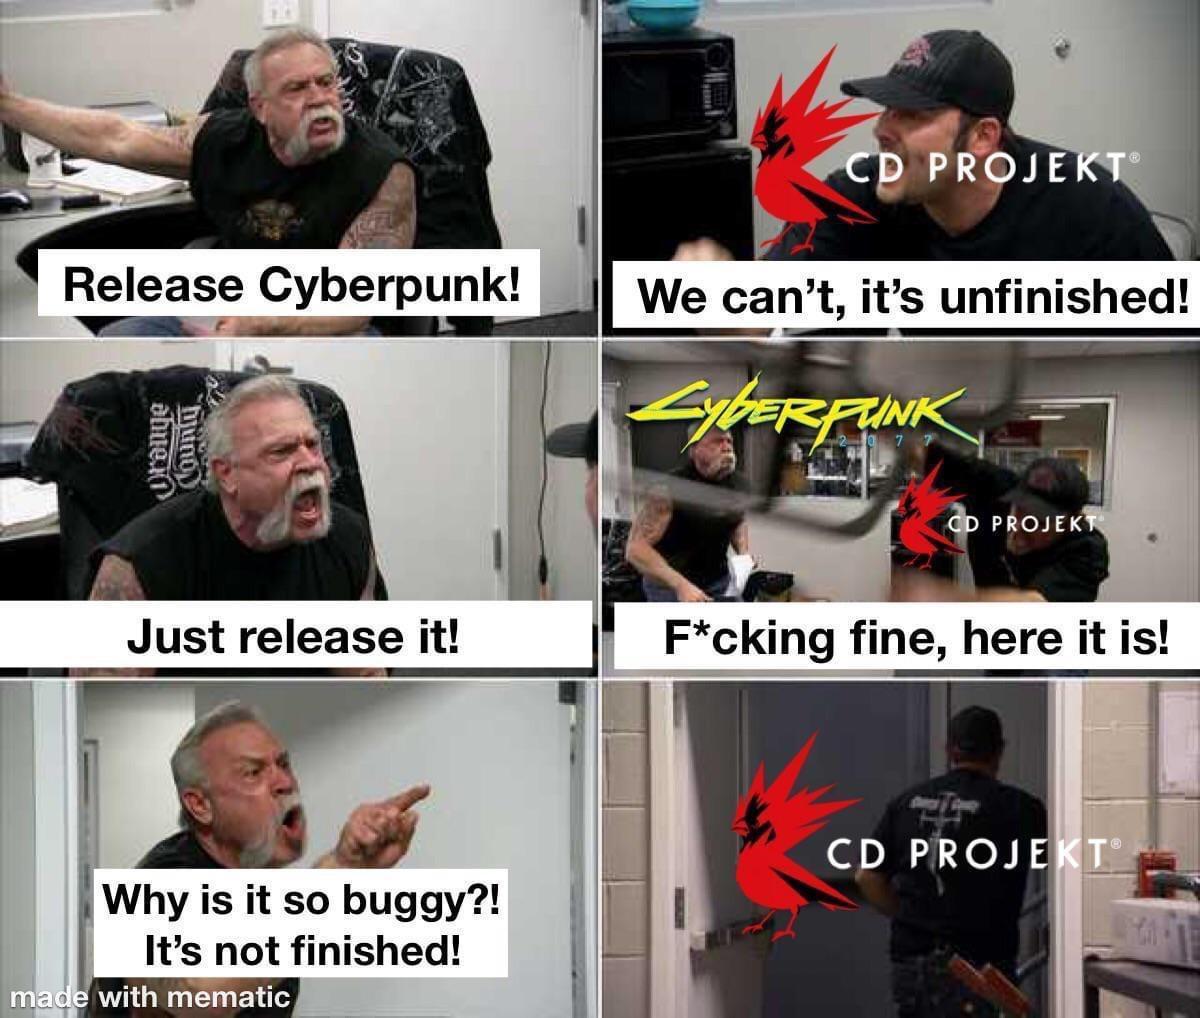 cyberpunk 2077 - Cd Projekt Release Cyberpunk! We can't, it's unfinished! , Drange Couna SyberPINK Cd Projekt Just release it! Fcking fine, here it is! Cd Projekt Why is it so buggy?! It's not finished! made with mematic